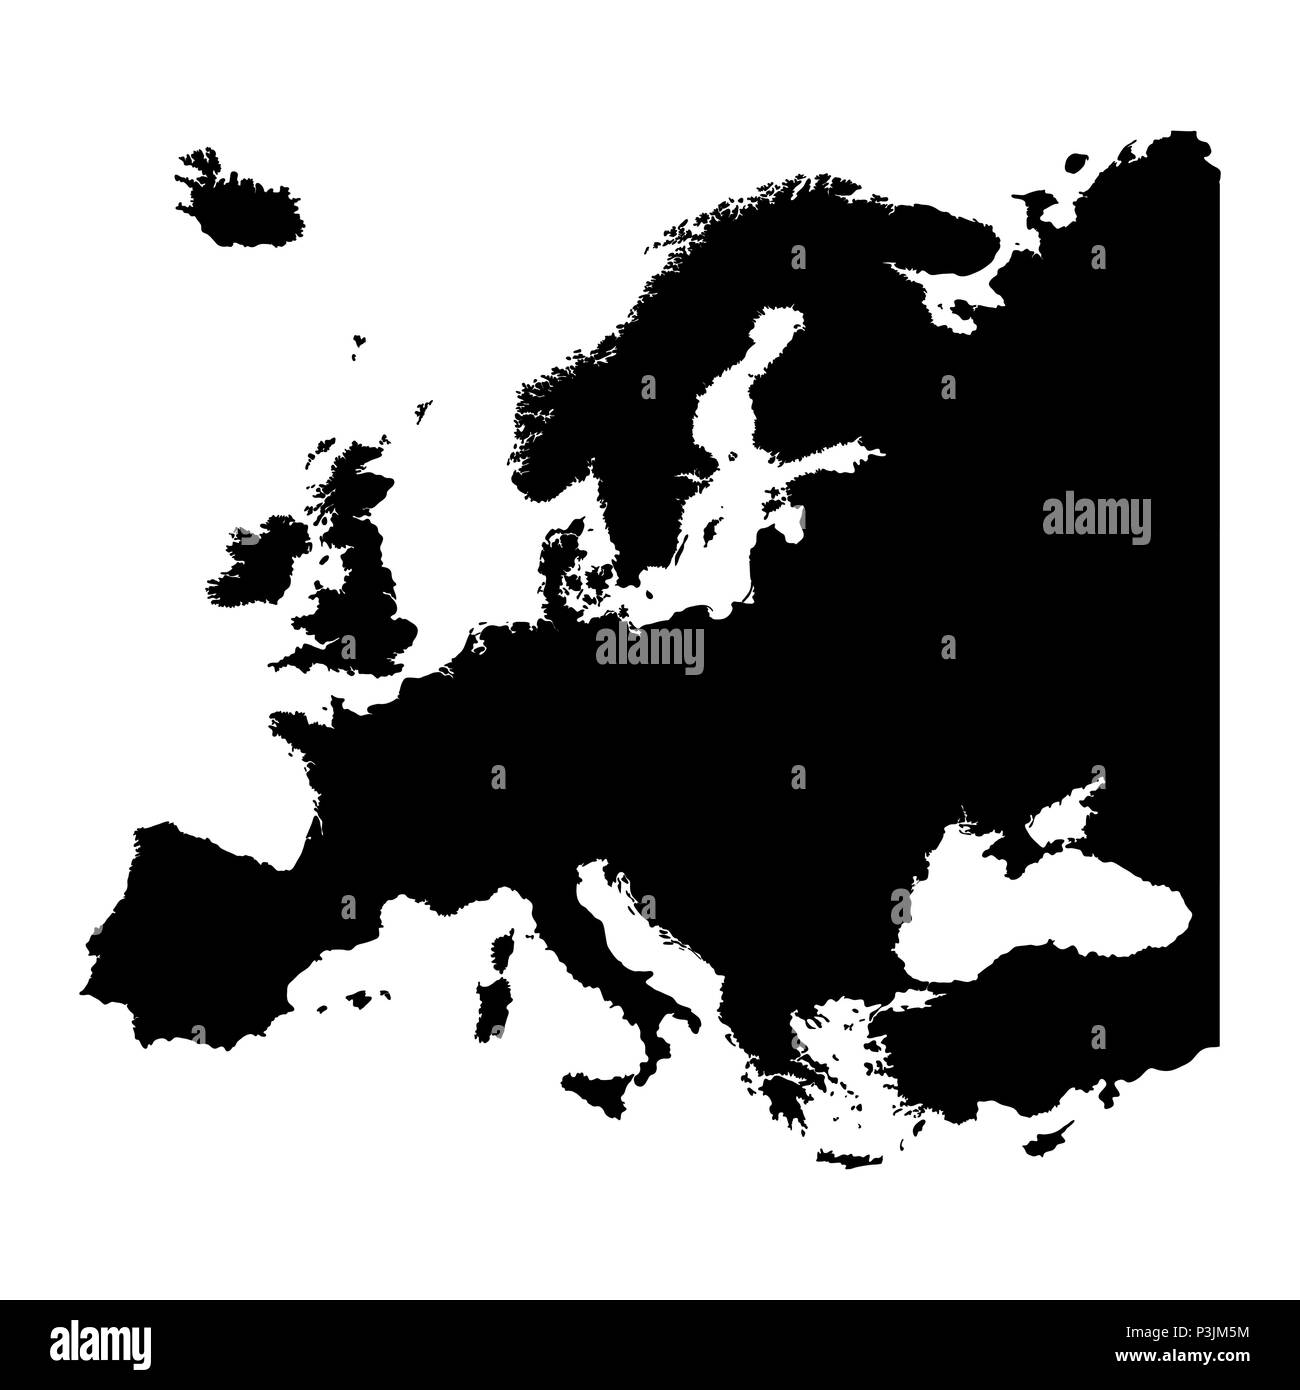 Map of Europe silhouette design isolate on white Stock Vector